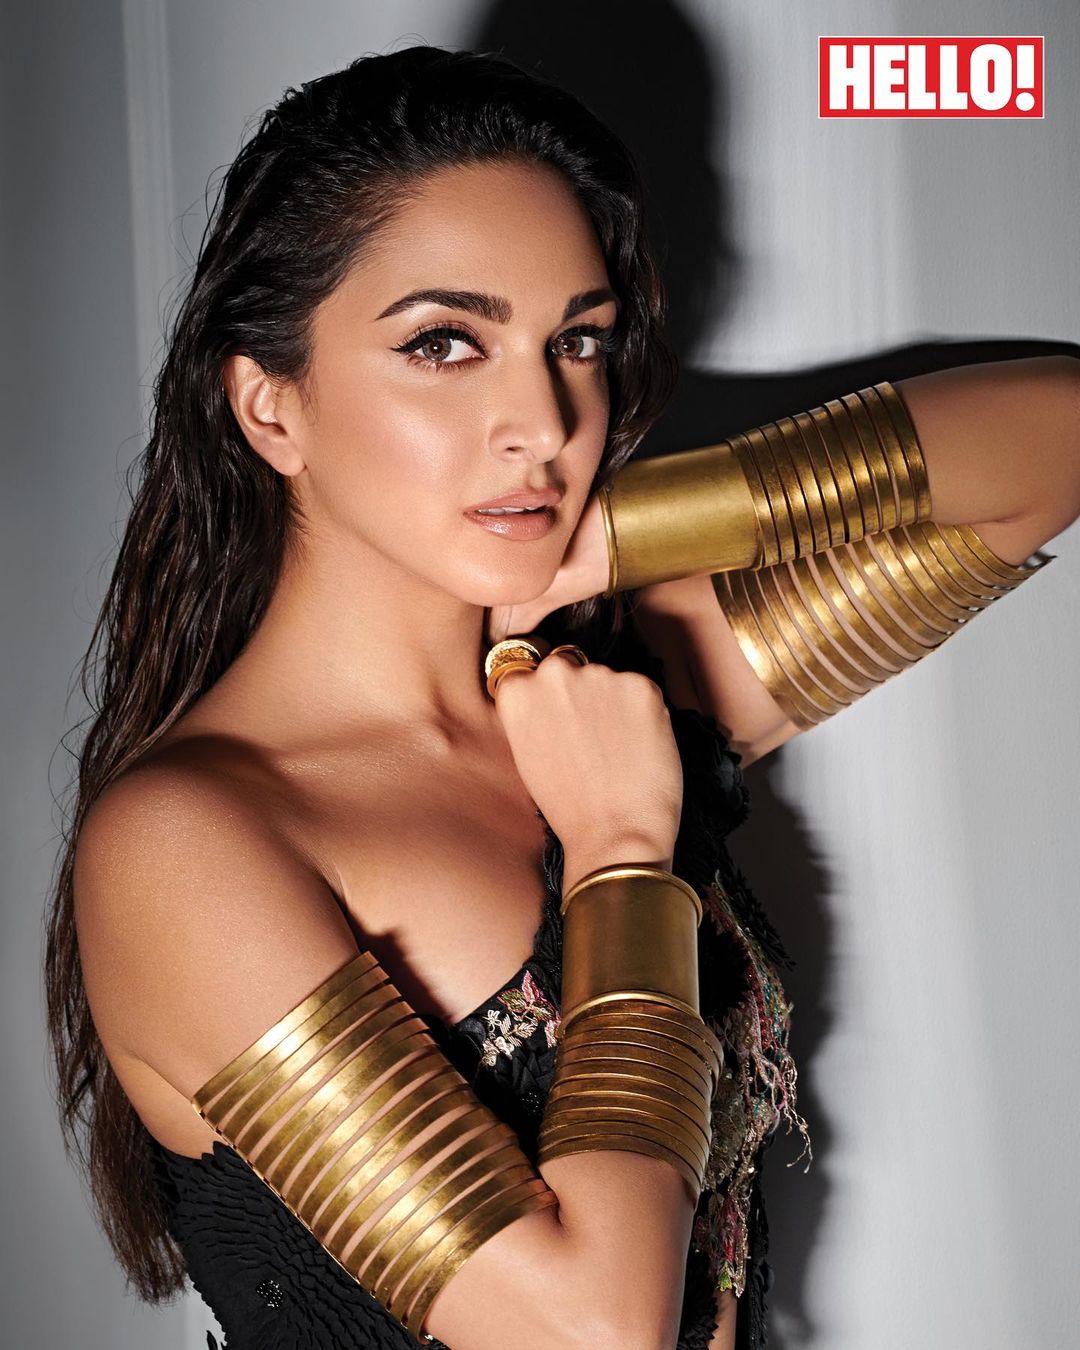 Kiara Advani gives Clepatra vibes in the golden arm bands and wrist bangles